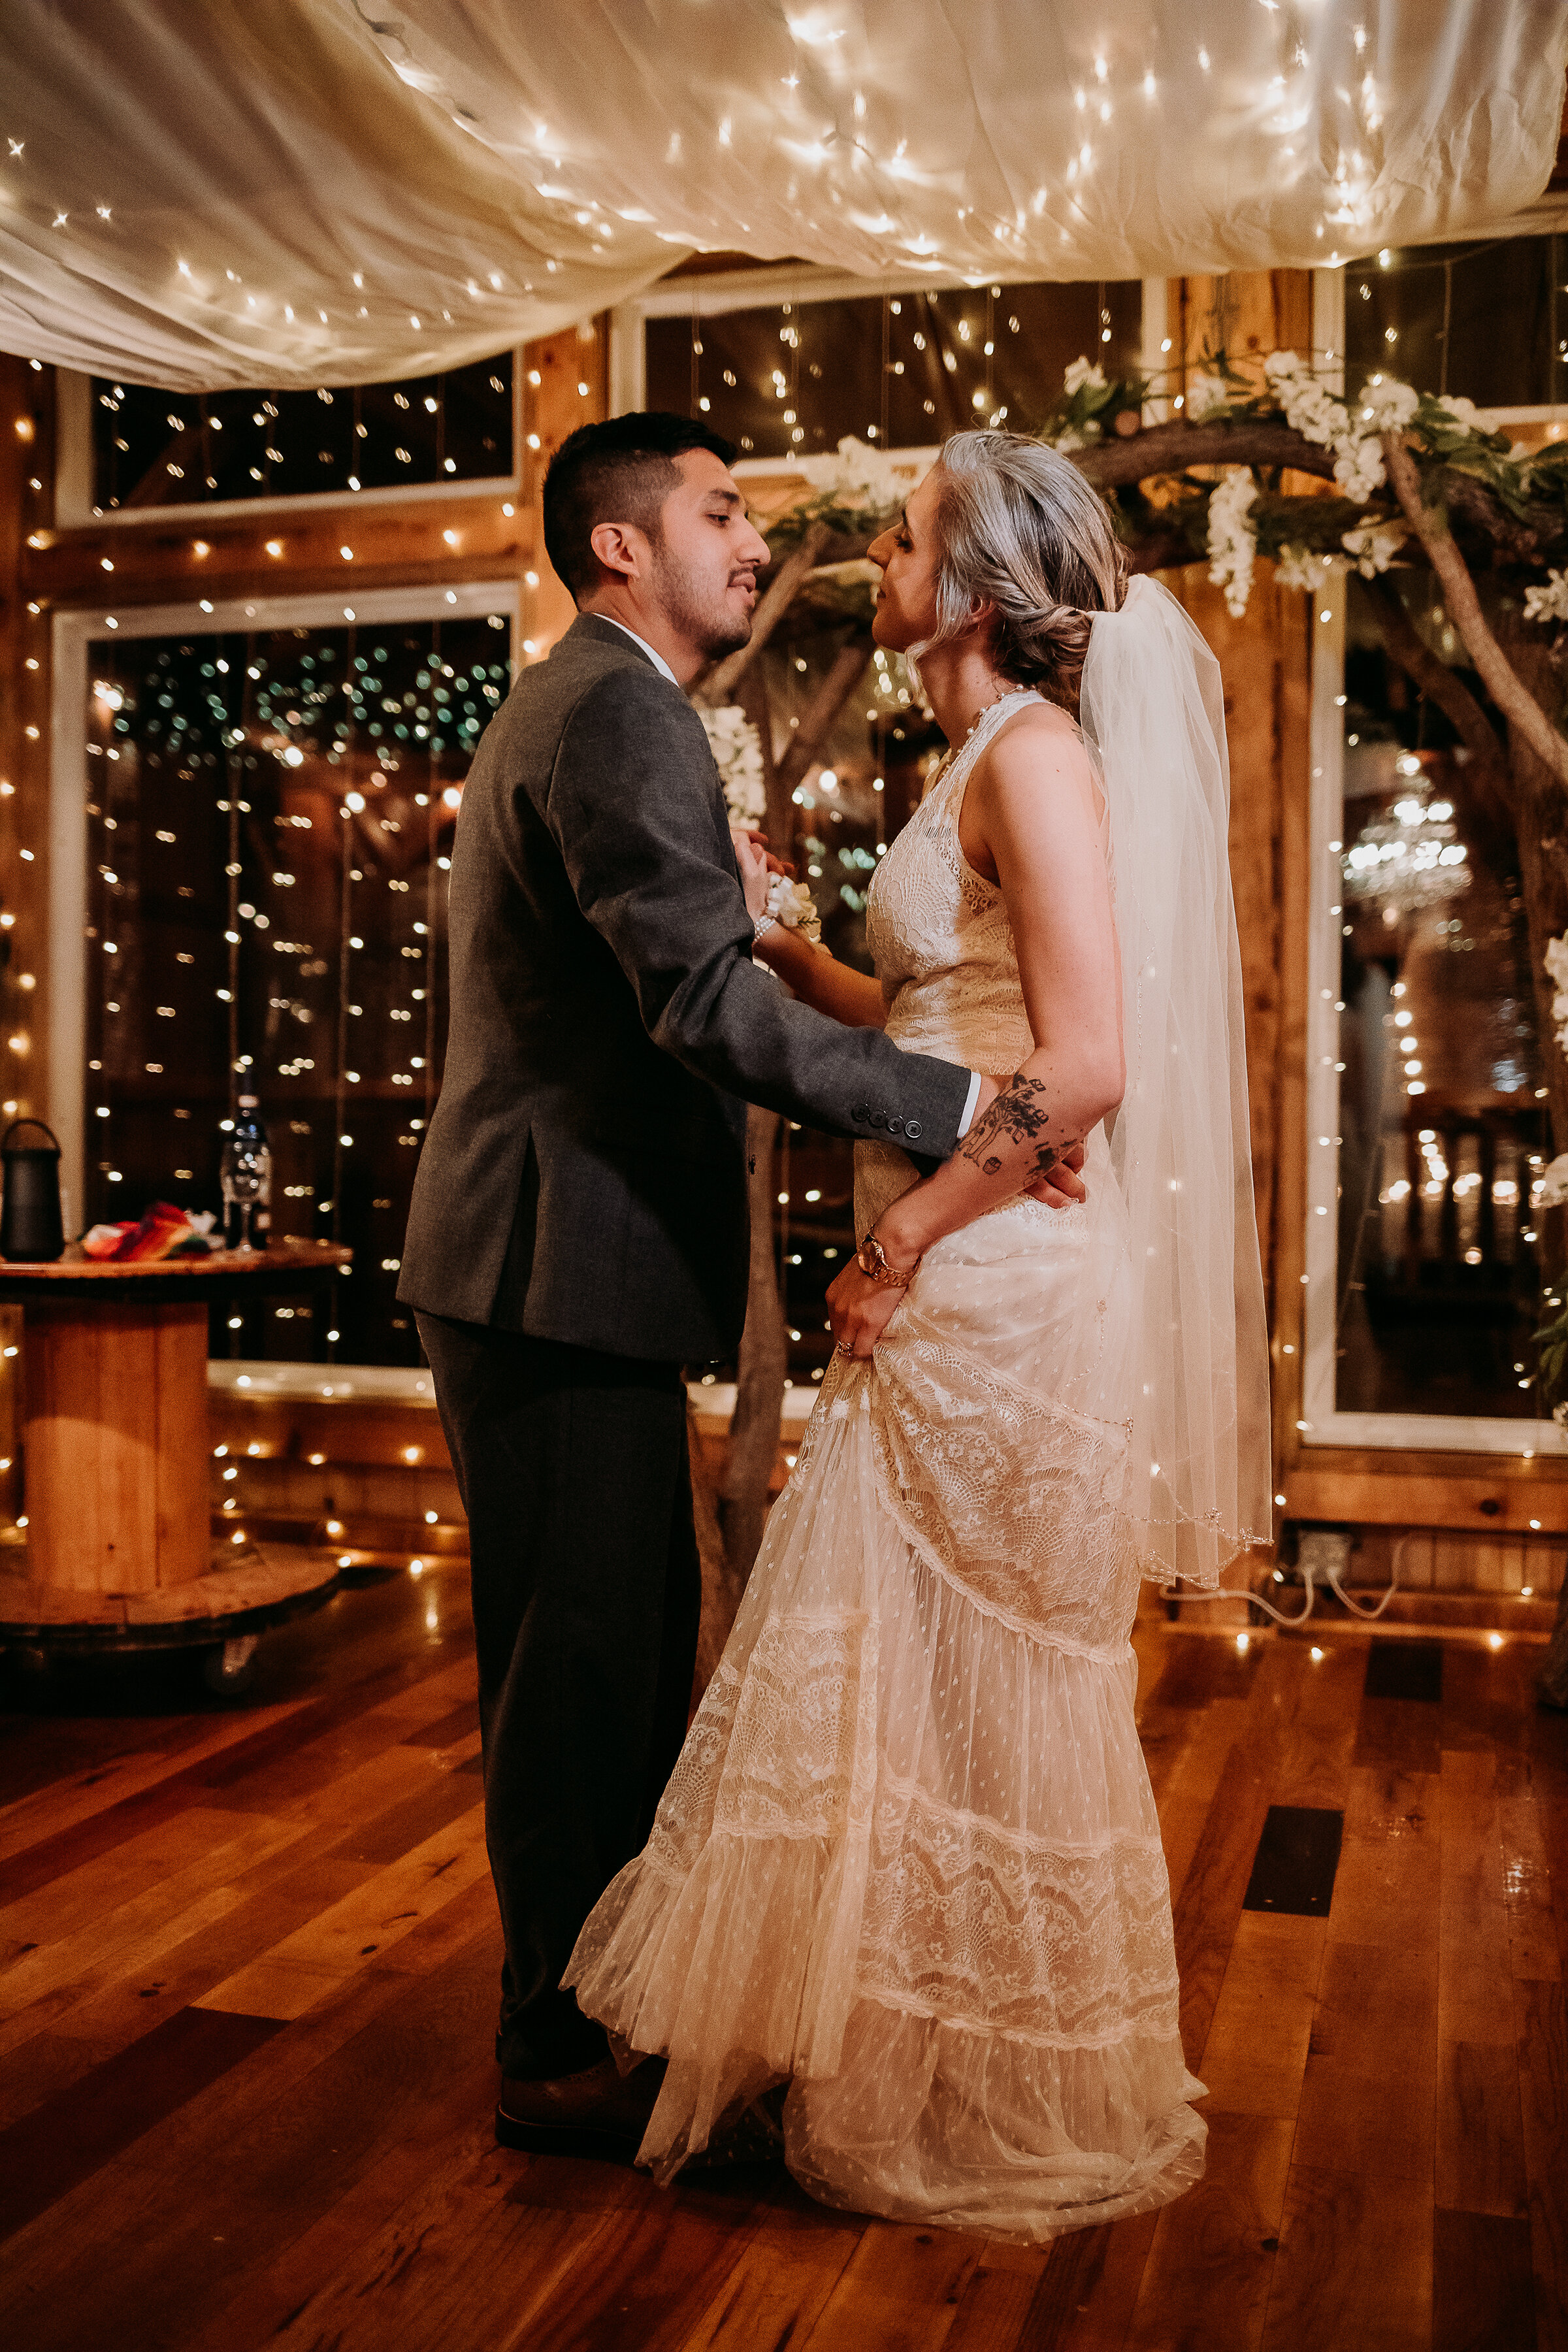  Kindred + Co. Photography captures romantic first dance moments under string lights, organza wedding decor, and floral wedding arch at this treehouse elopement. bohemian lace wedding dress, waist length wedding veil, gray tweed wedding suit, elopeme